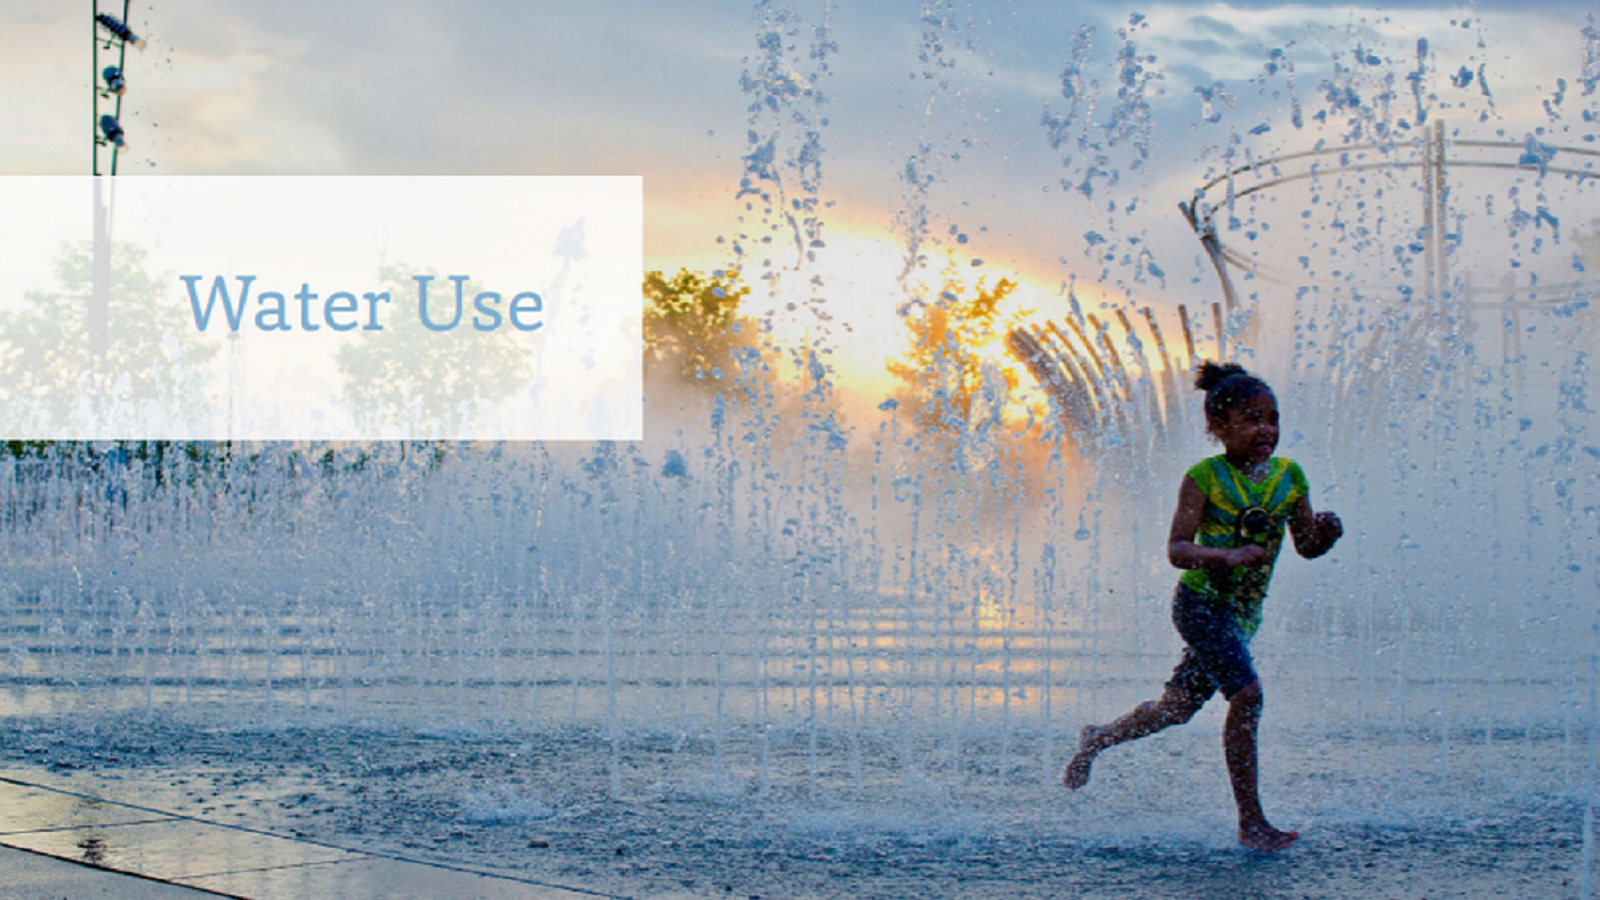 Child running through fountain with the text 'Water Use'